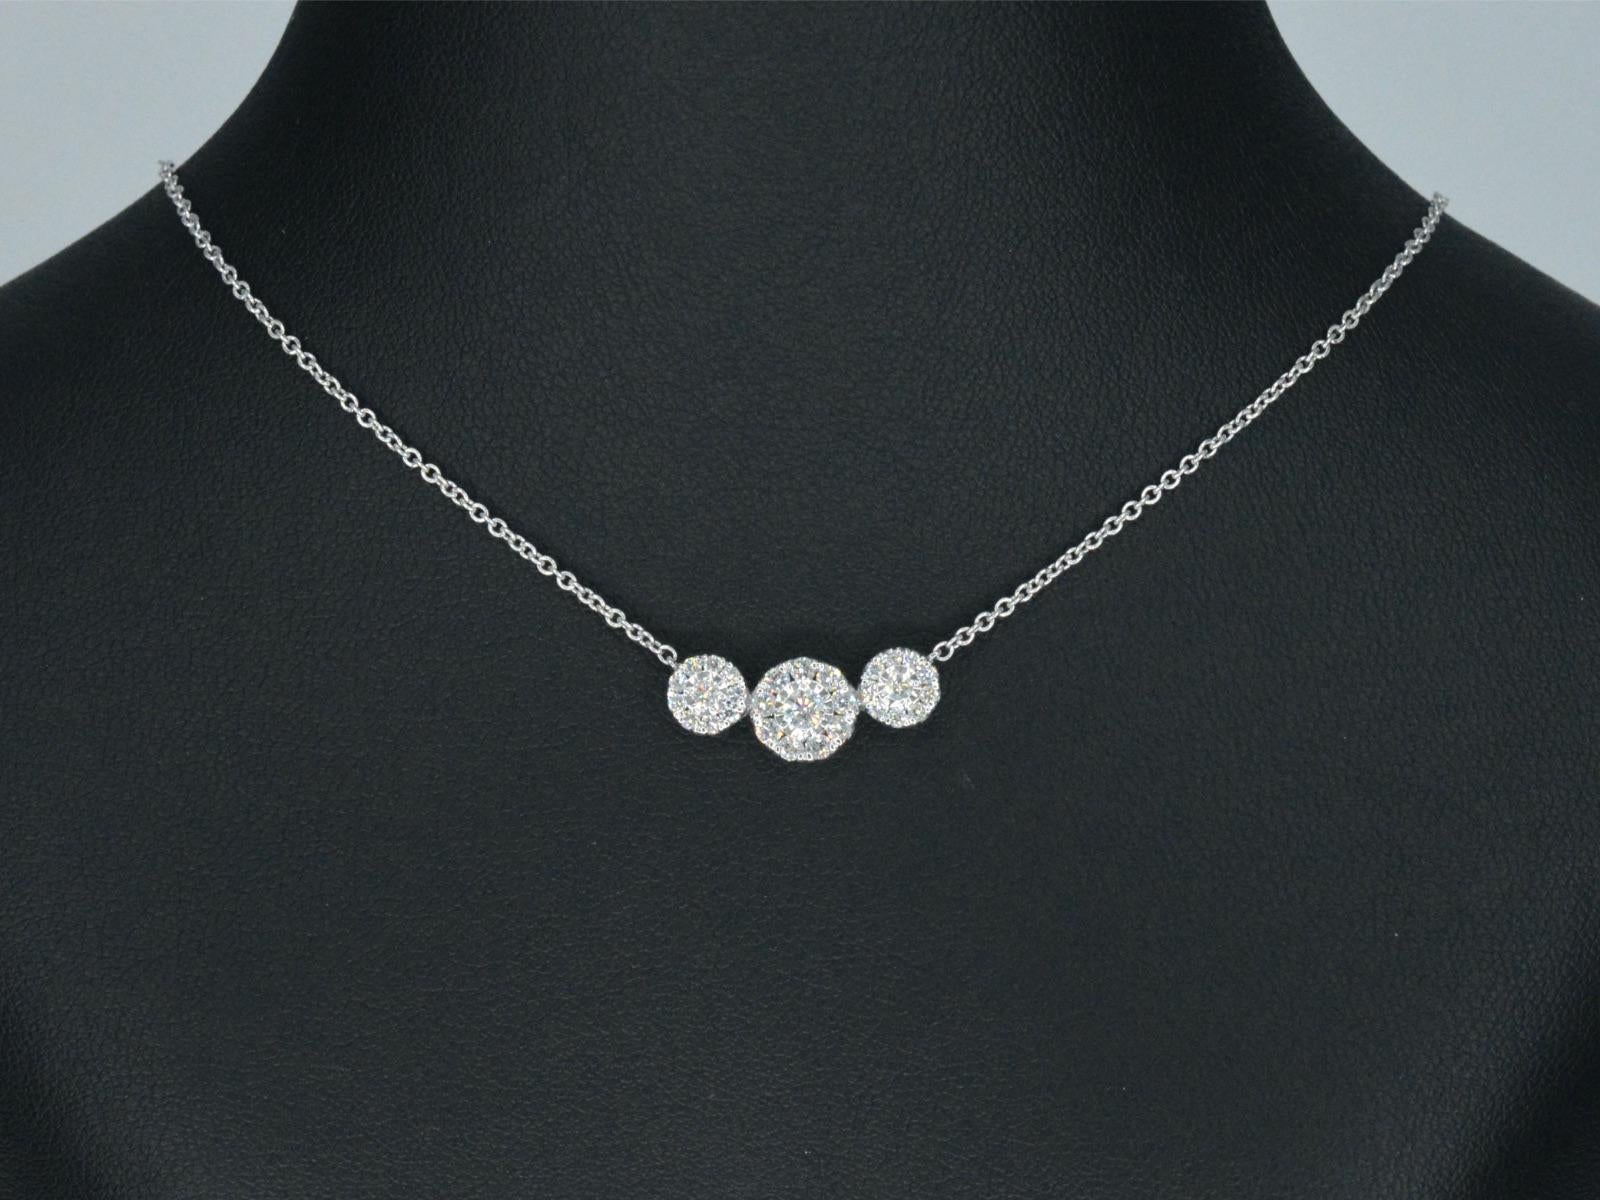 Diamonds: Naturally shiny; Weight: 0.75 carat; Cut: Brilliant; Colour: F-G; Purity: VS; Grinding quality: Very good; Jewel: Necklace; Weight: 5 grams; Hallmark: 18 karat ( 750 ); Length: 44 cm; Condition: New; The quality has been taken from the